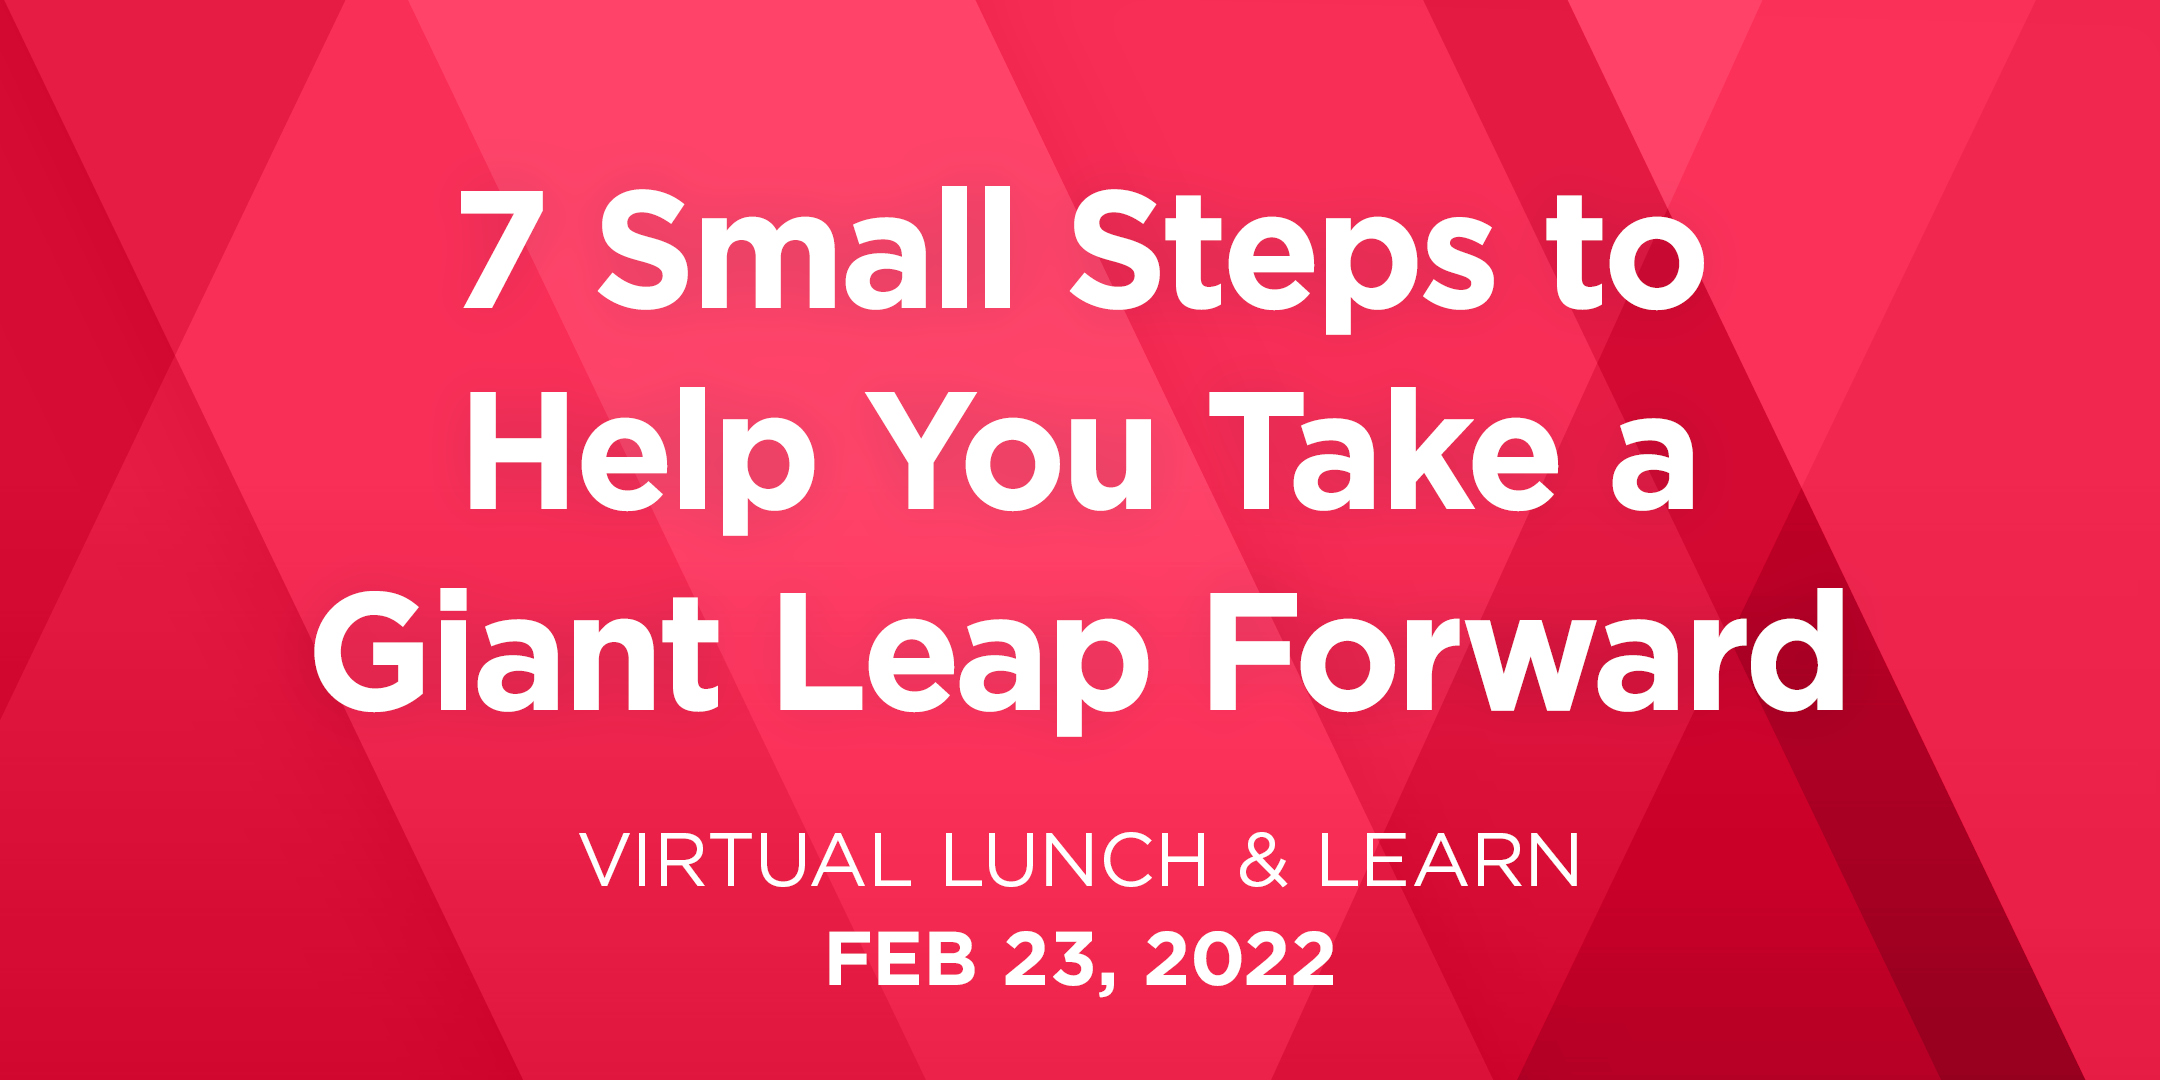 7 Small Steps to Help You Take a Giant Leap Forward